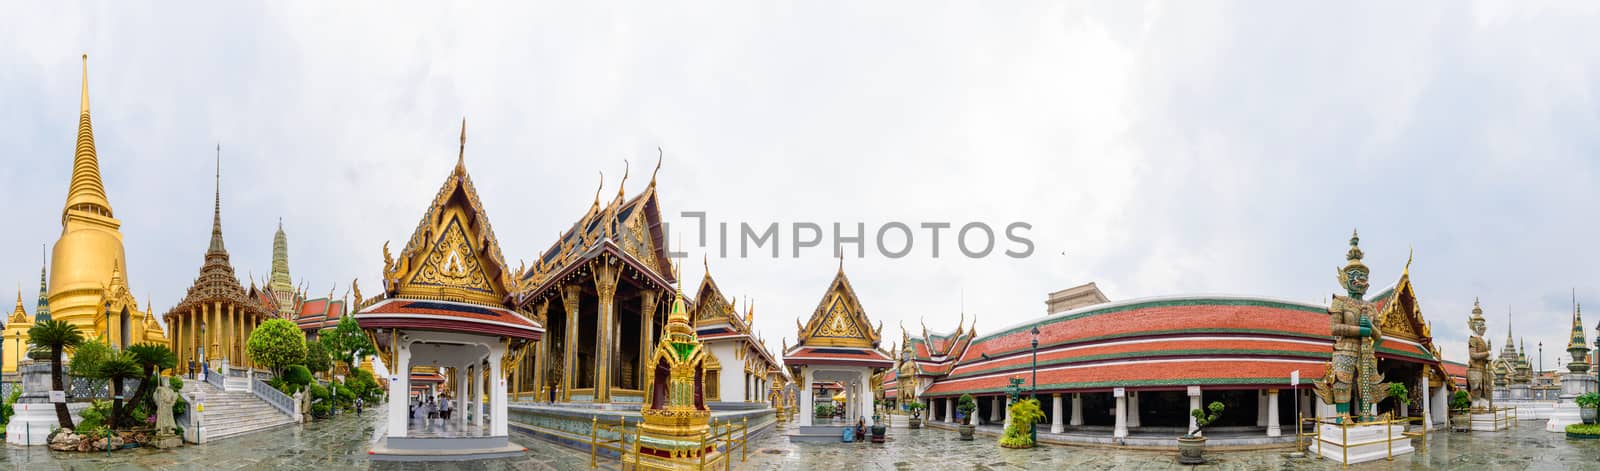 Panorama view of Wat Phra Kaew or name The Temple of the Emerald   Buddha by rukawajung